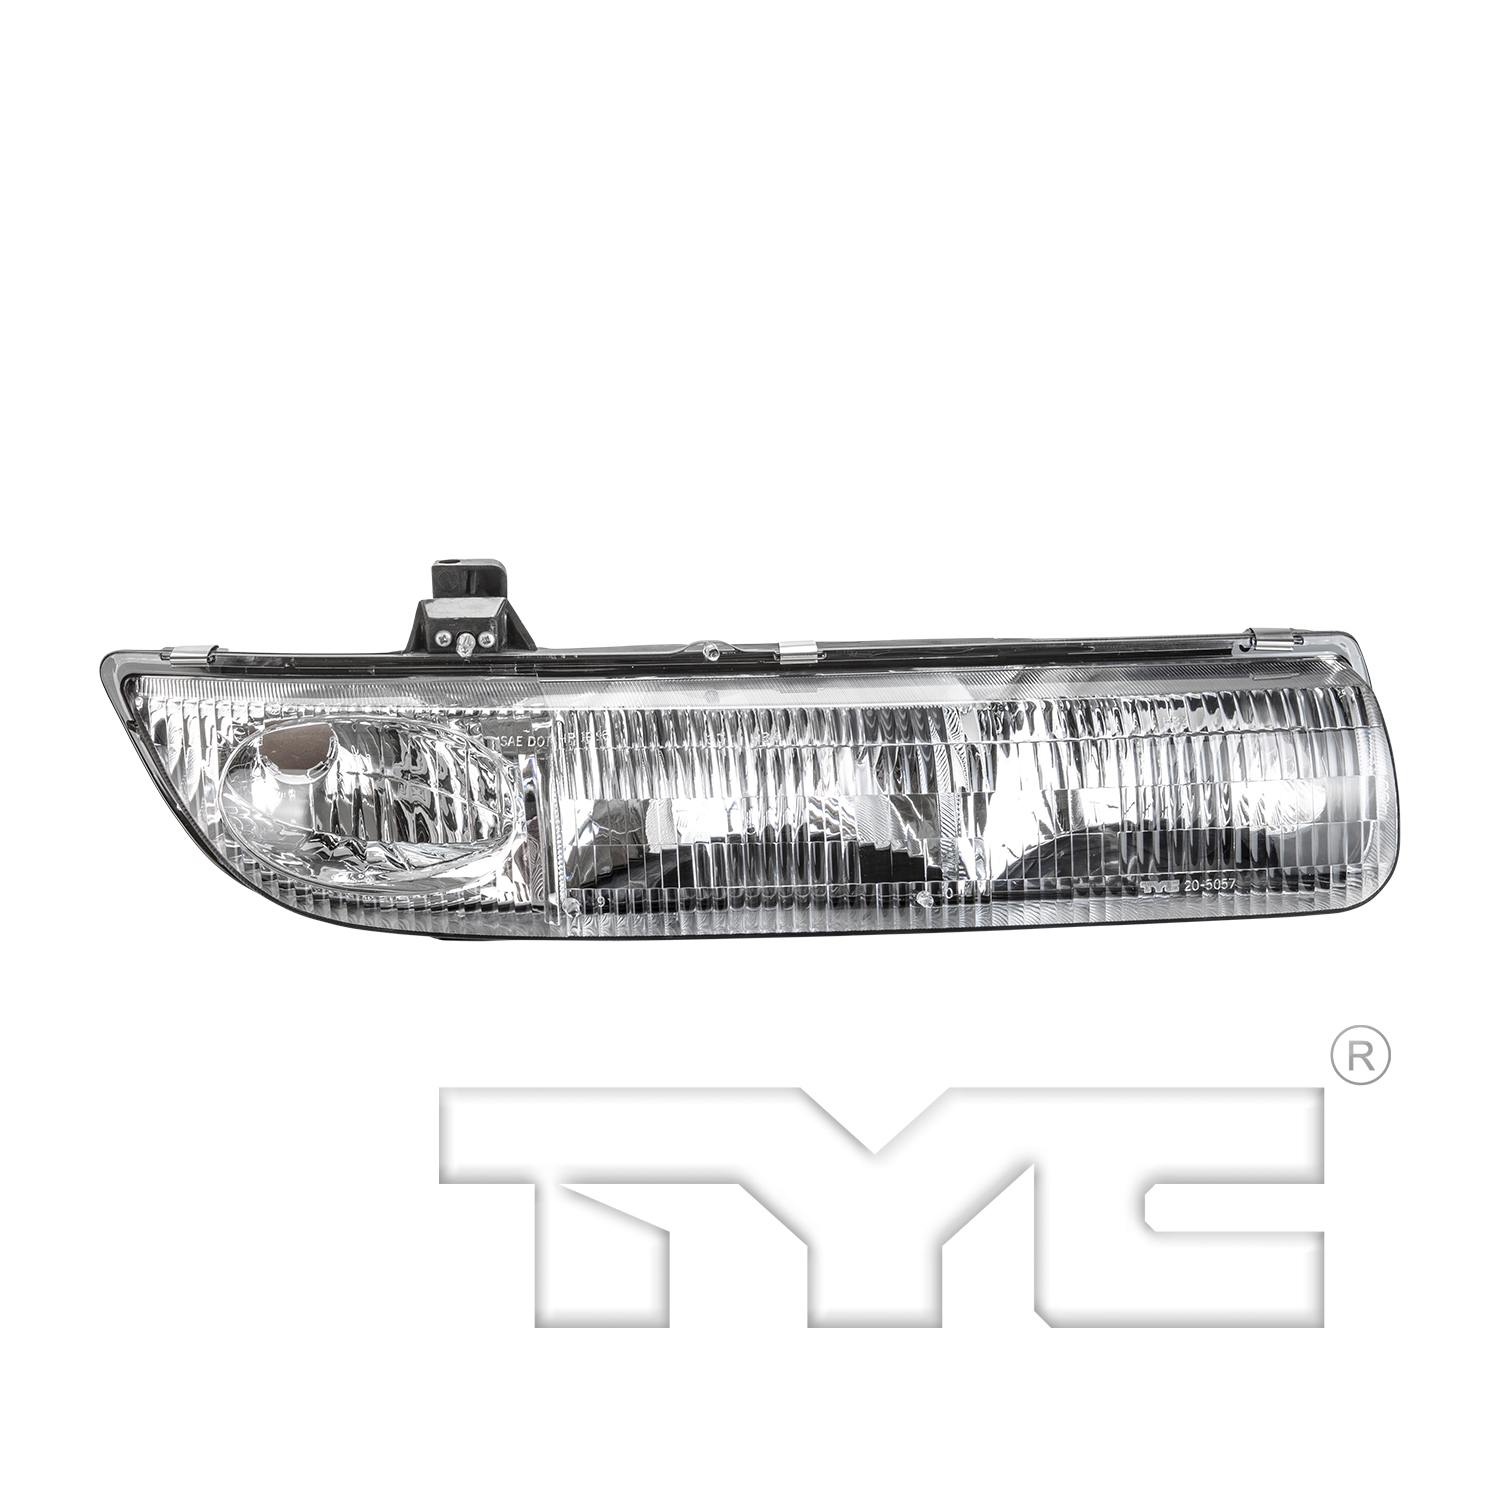 Aftermarket HEADLIGHTS for SATURN - SW2, SW2,96-99,RT Headlamp assy composite